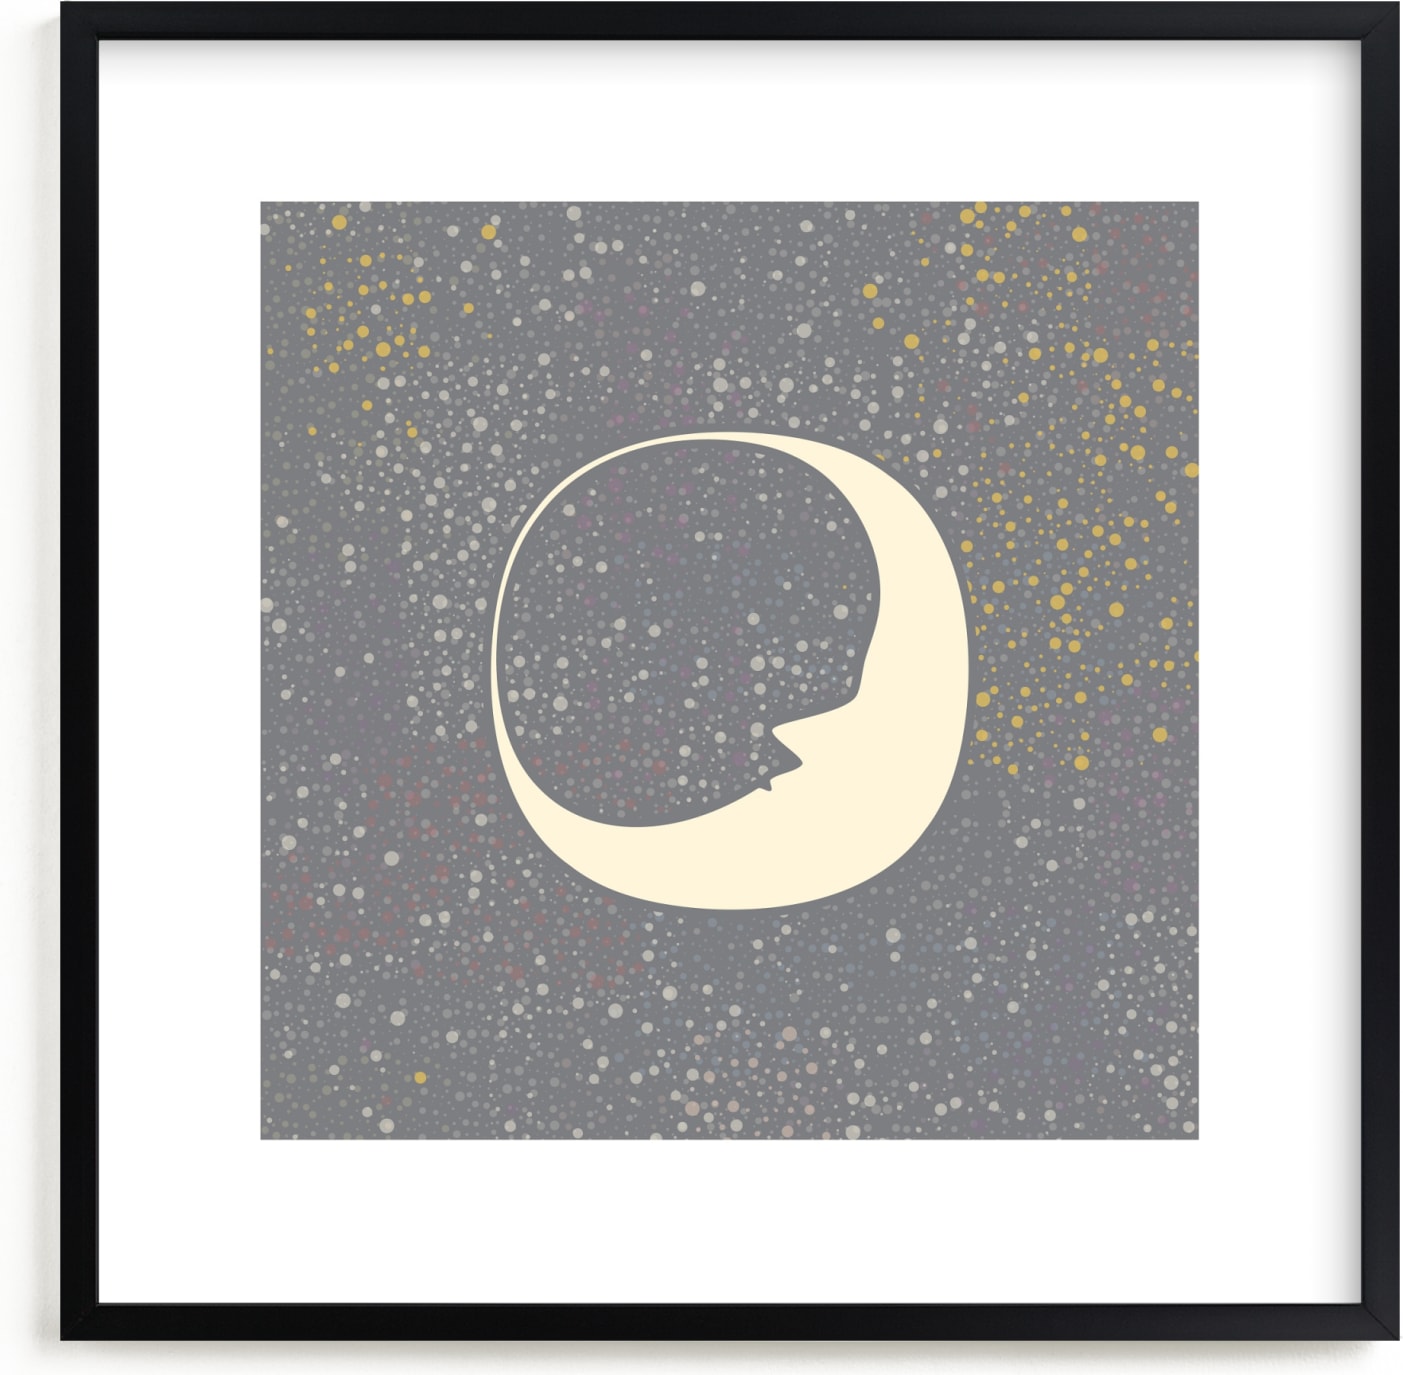 This is a grey nursery wall art by Katherine Morgan called Celestial Moon.